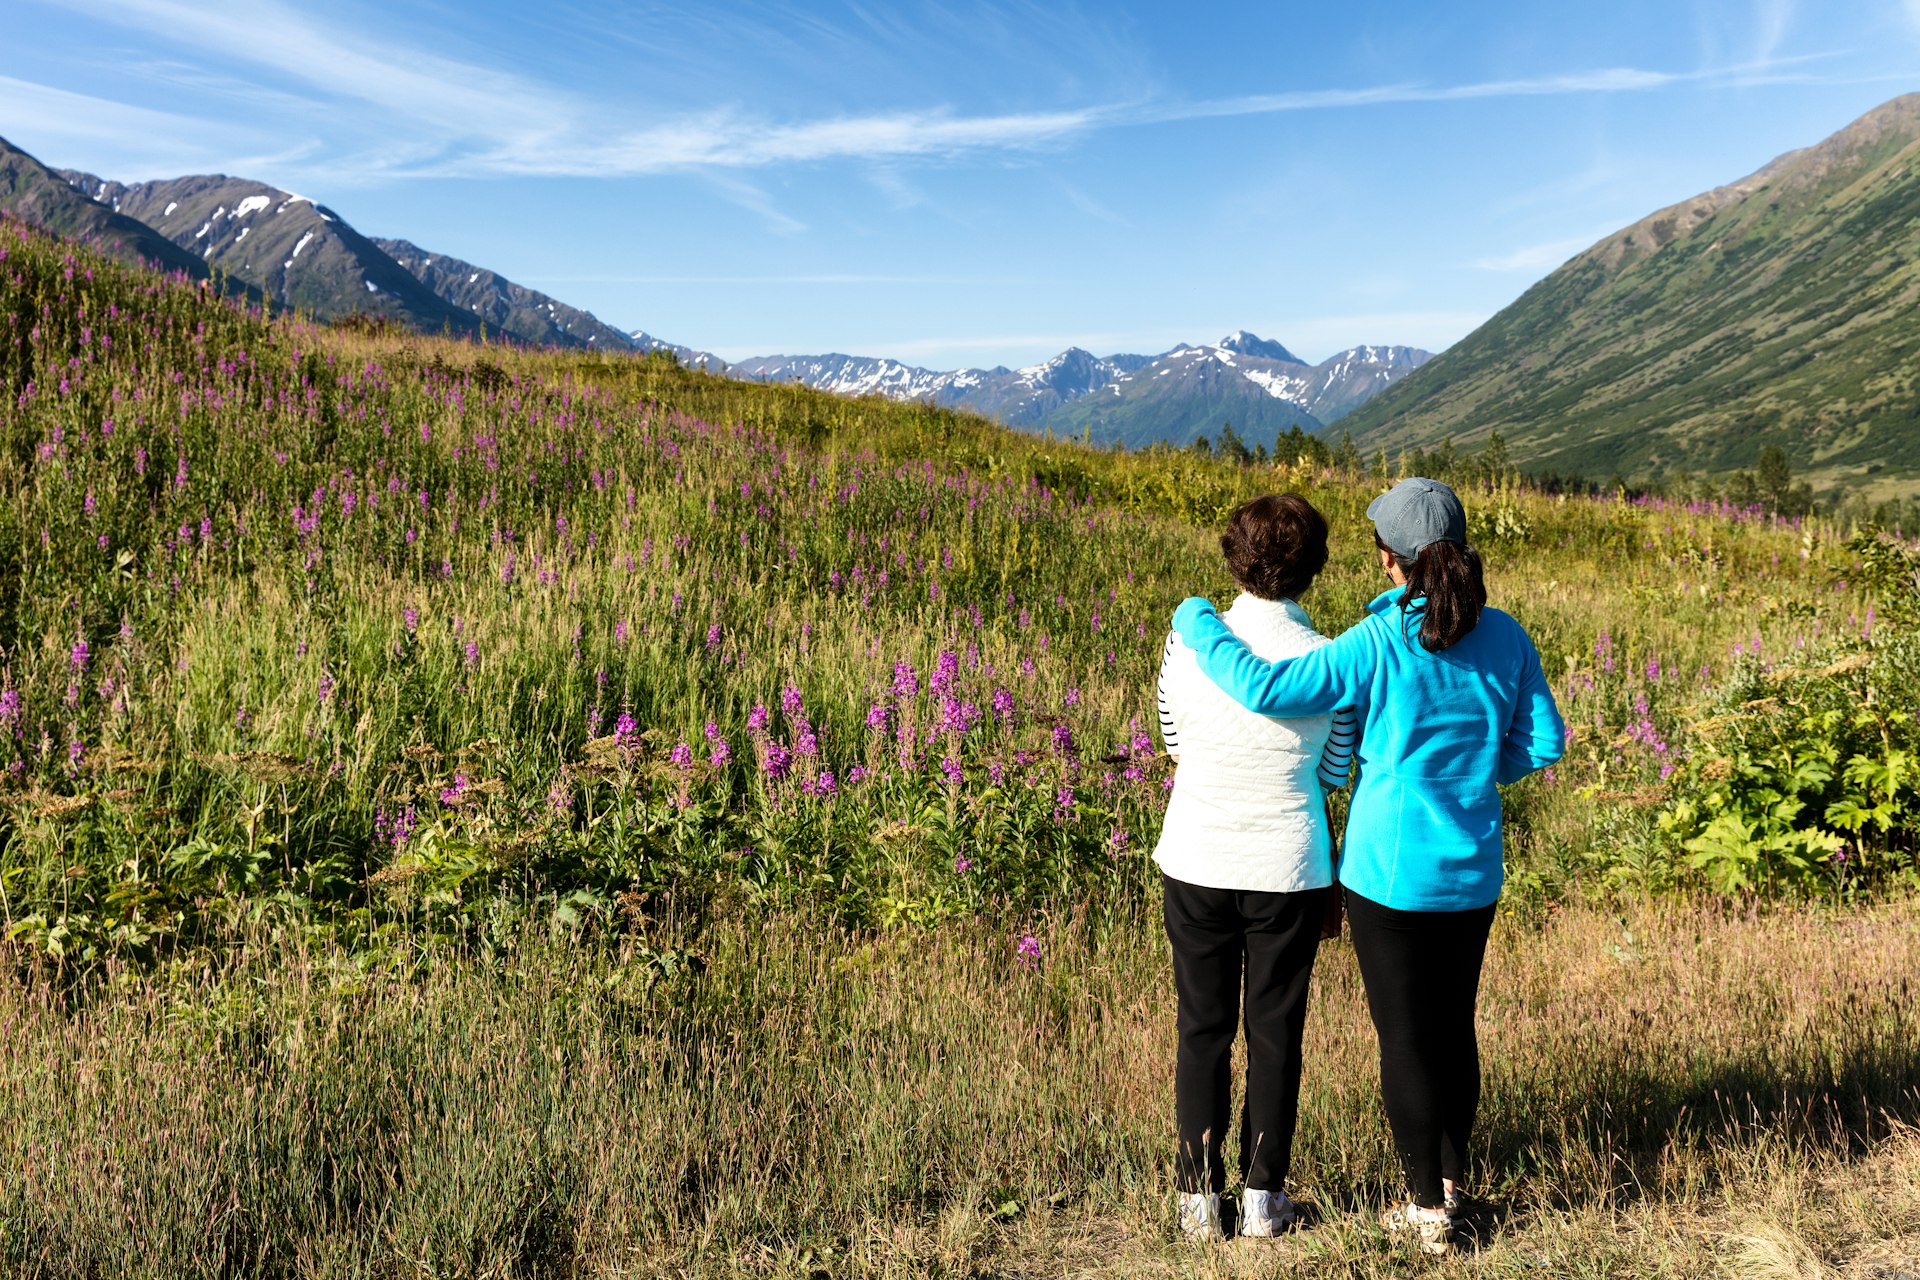 Two women hikers looking at the landscape in Denali National Park, Alaska